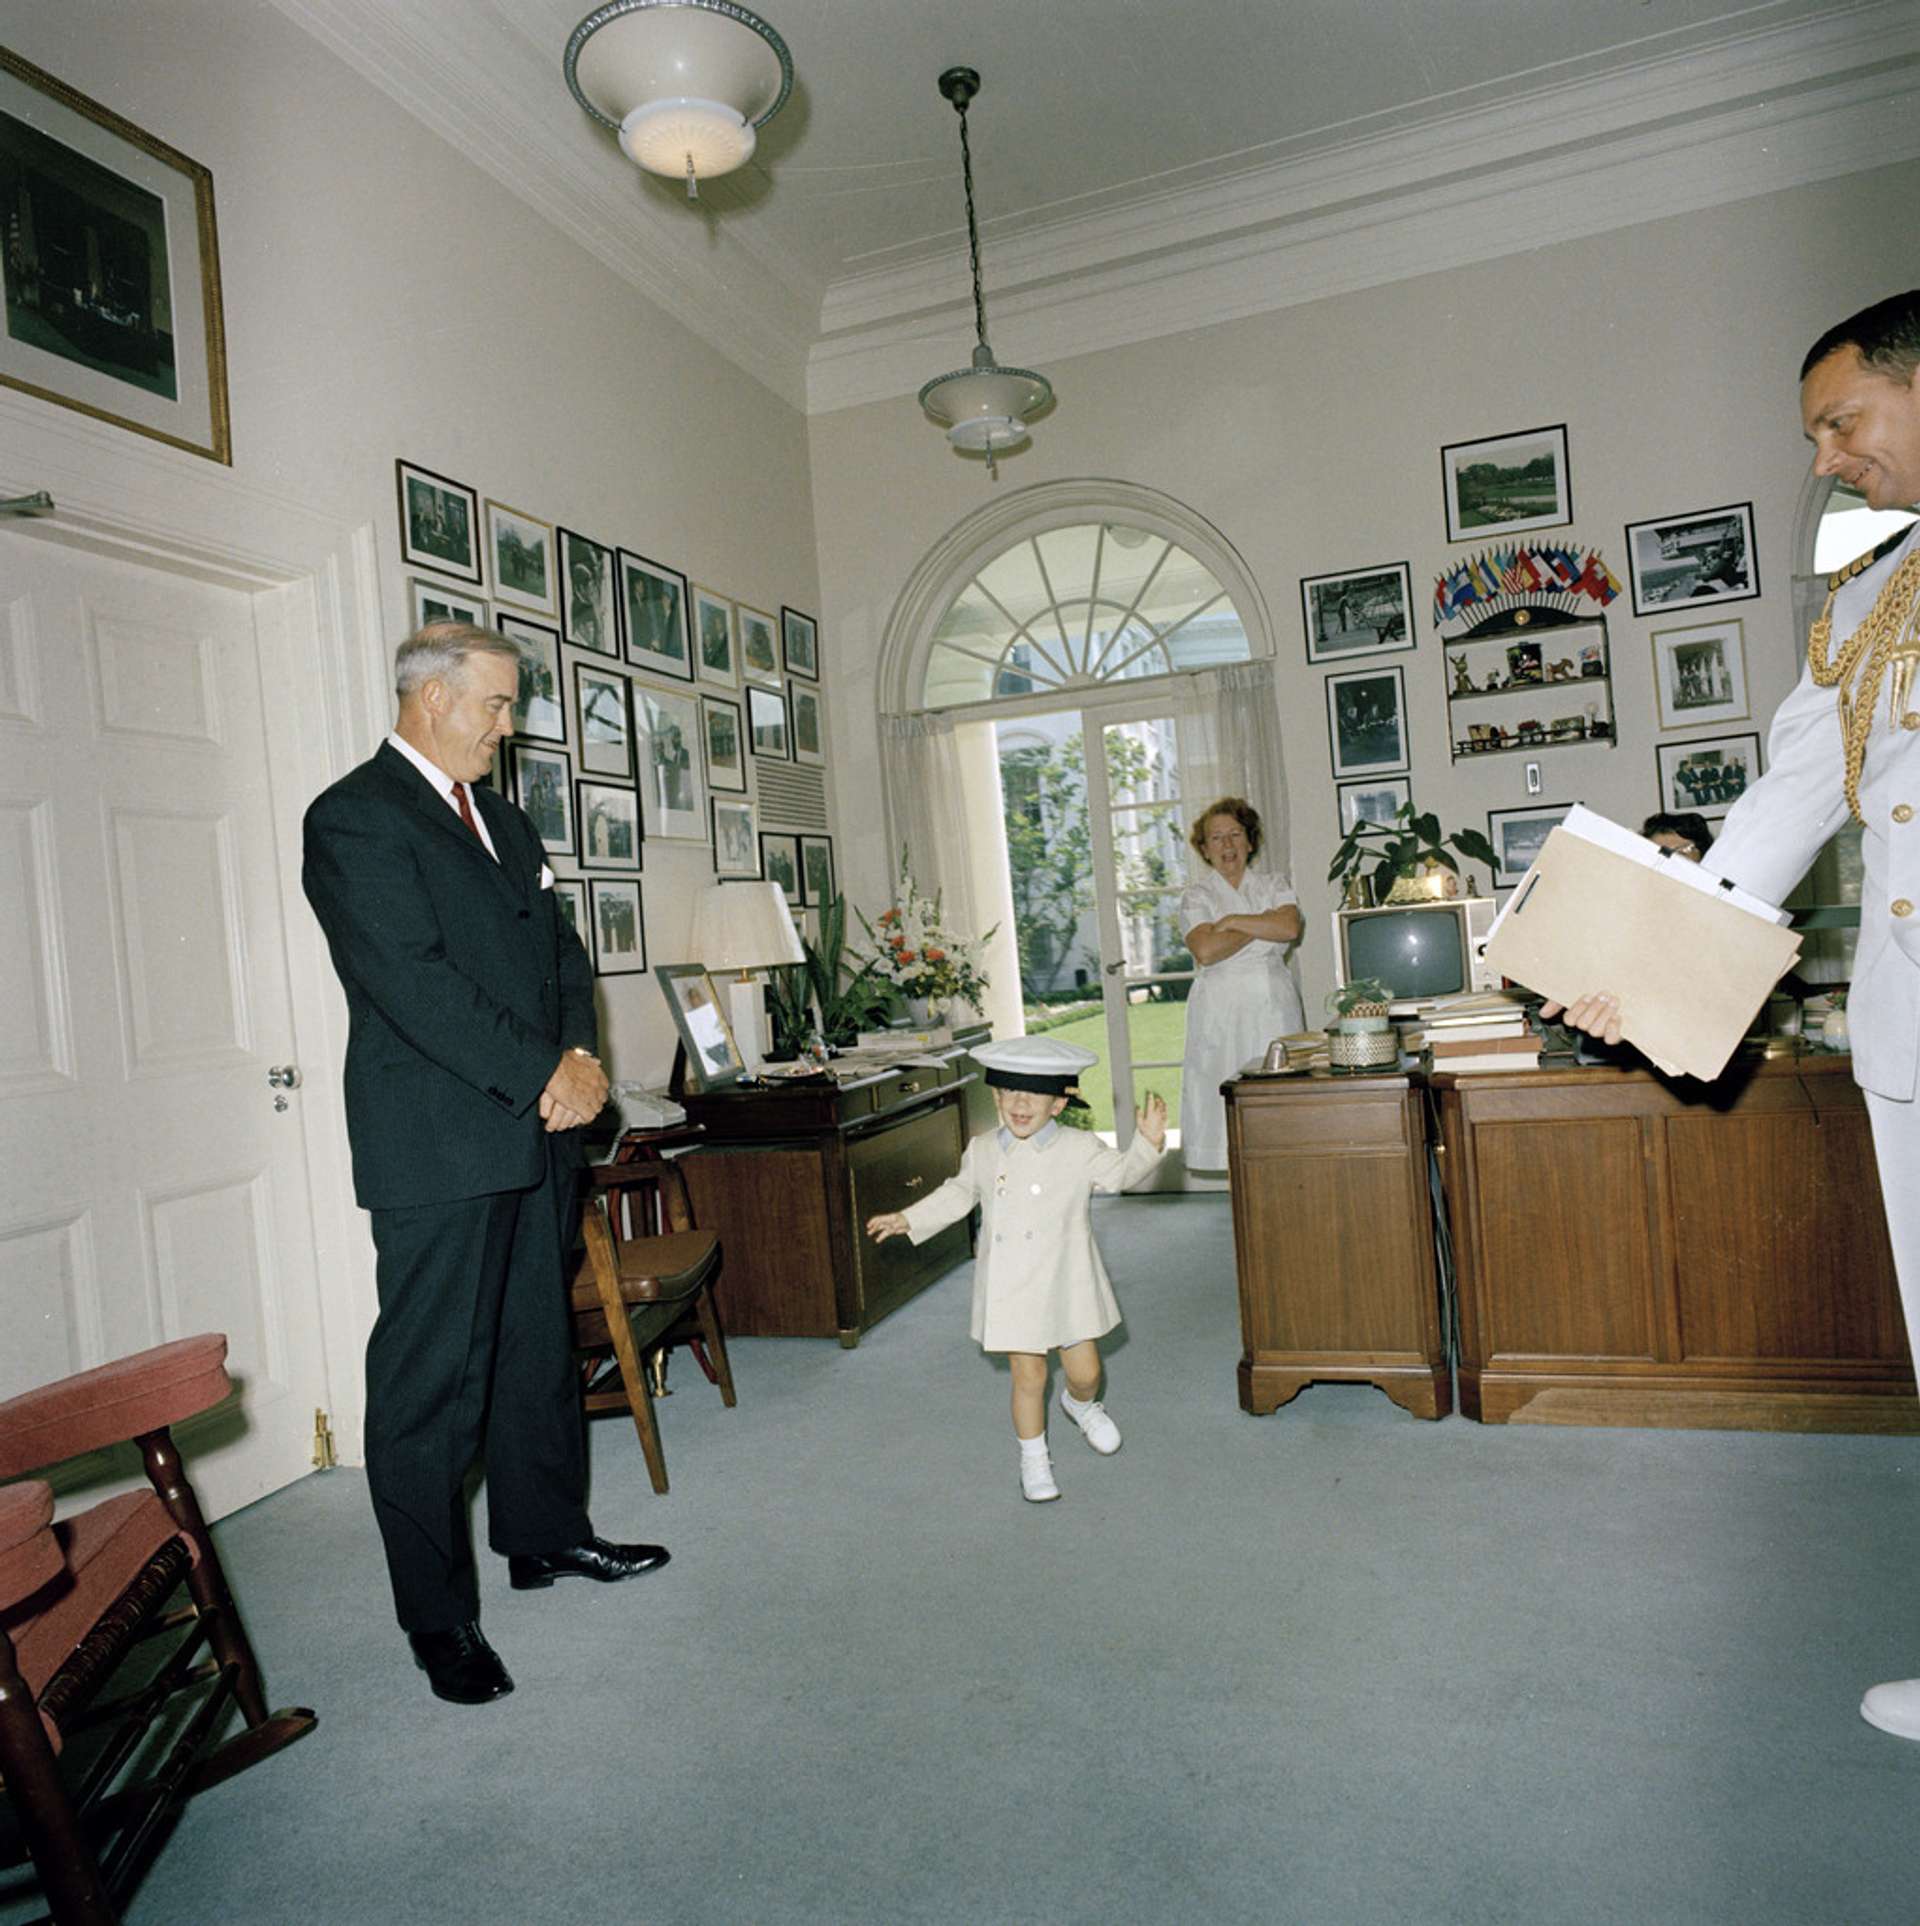 A photograph of a young boy running round in the White House playing with a hat. 